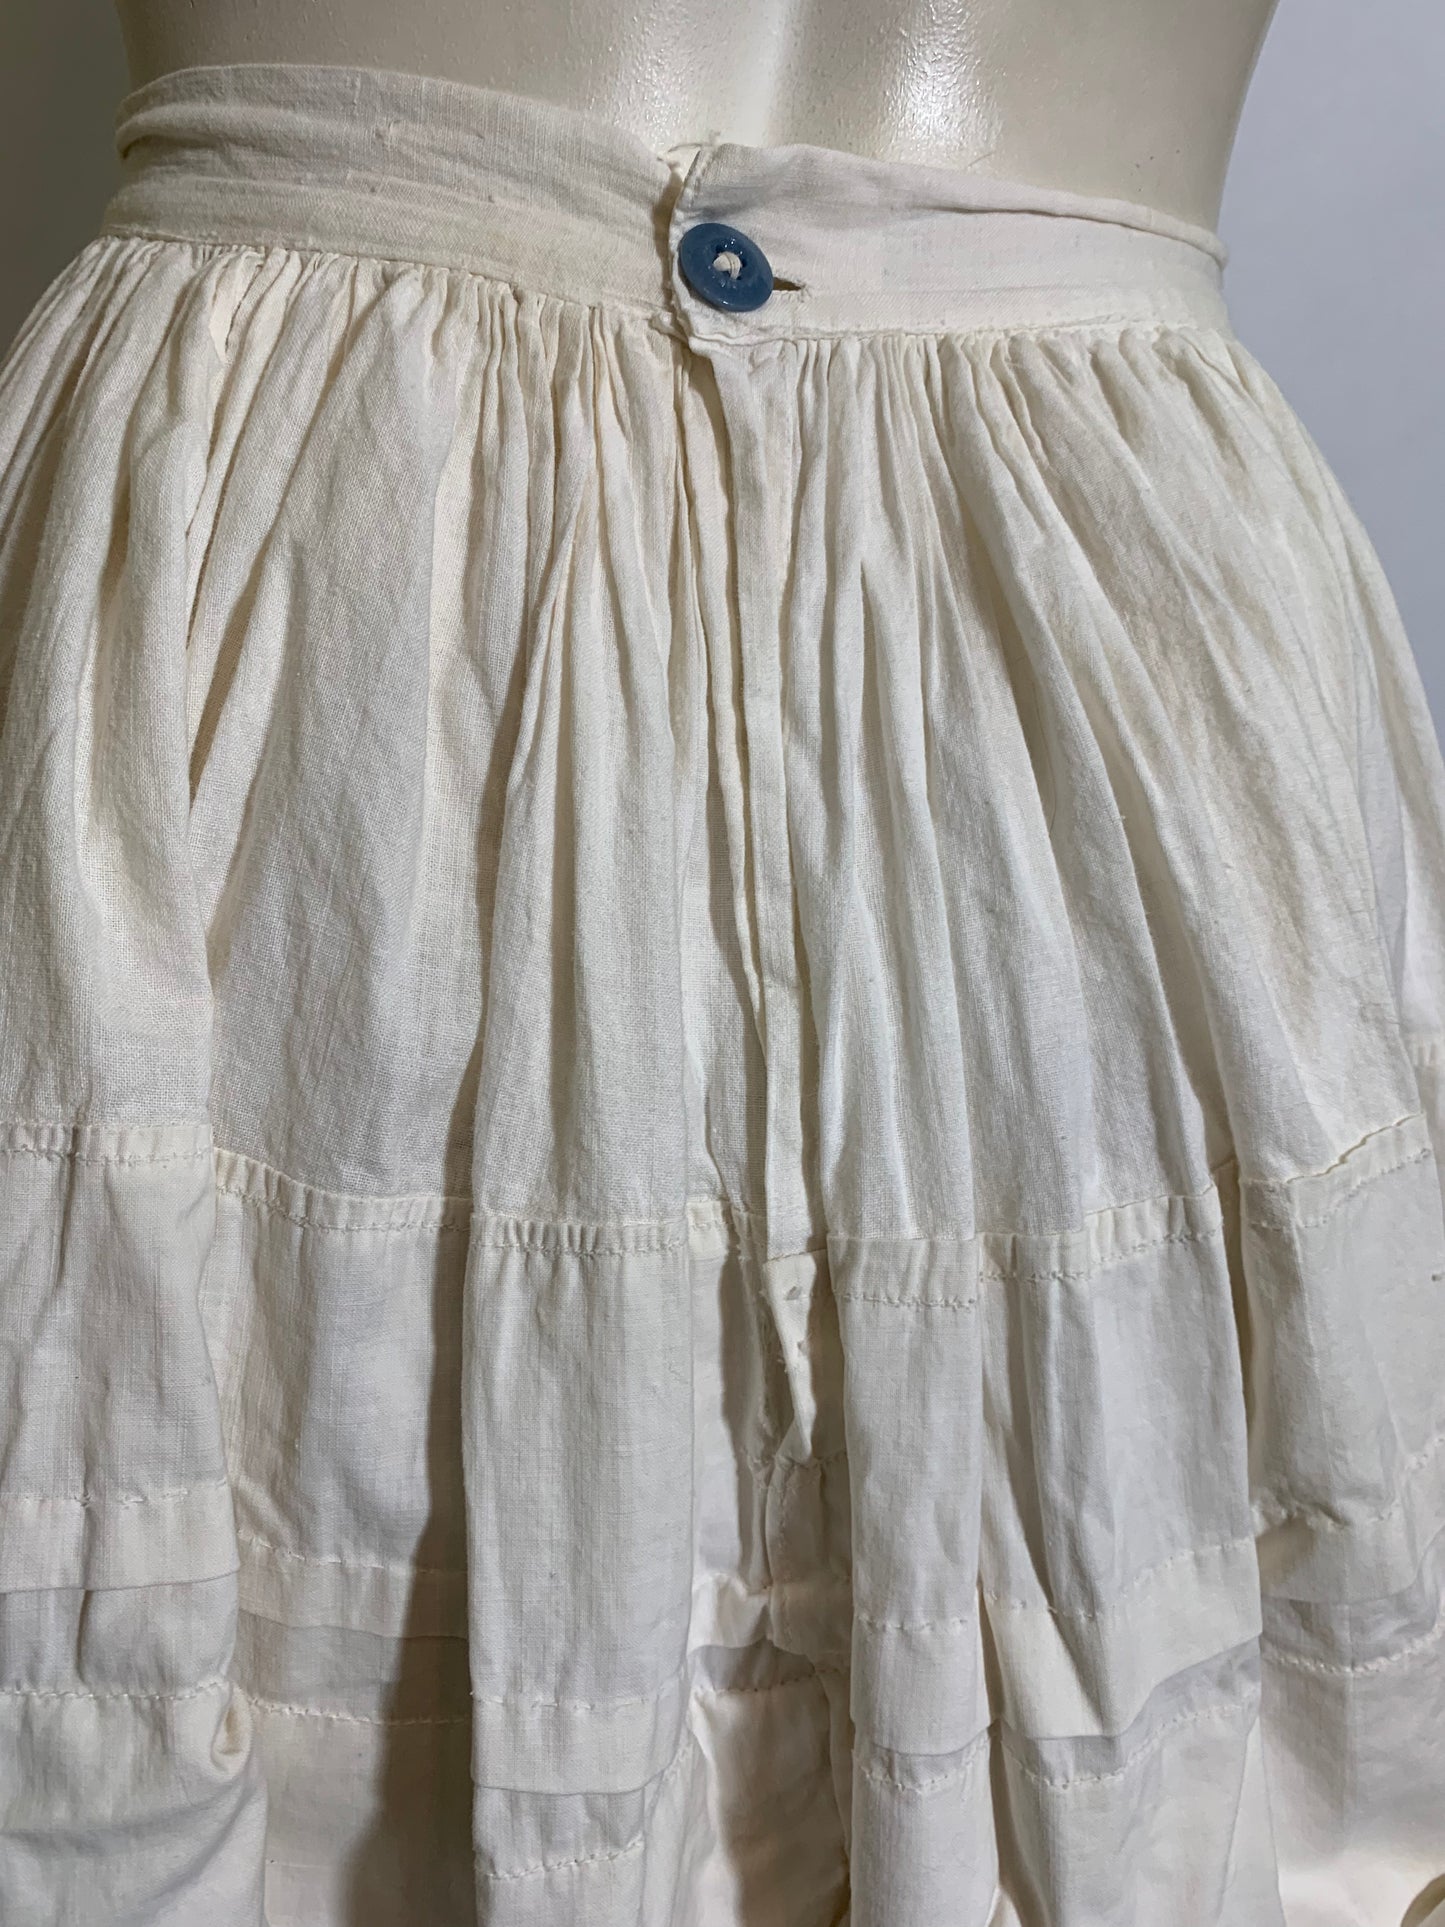 Ruffled and Embroidered Short White Cotton Petticoat circa 1890s